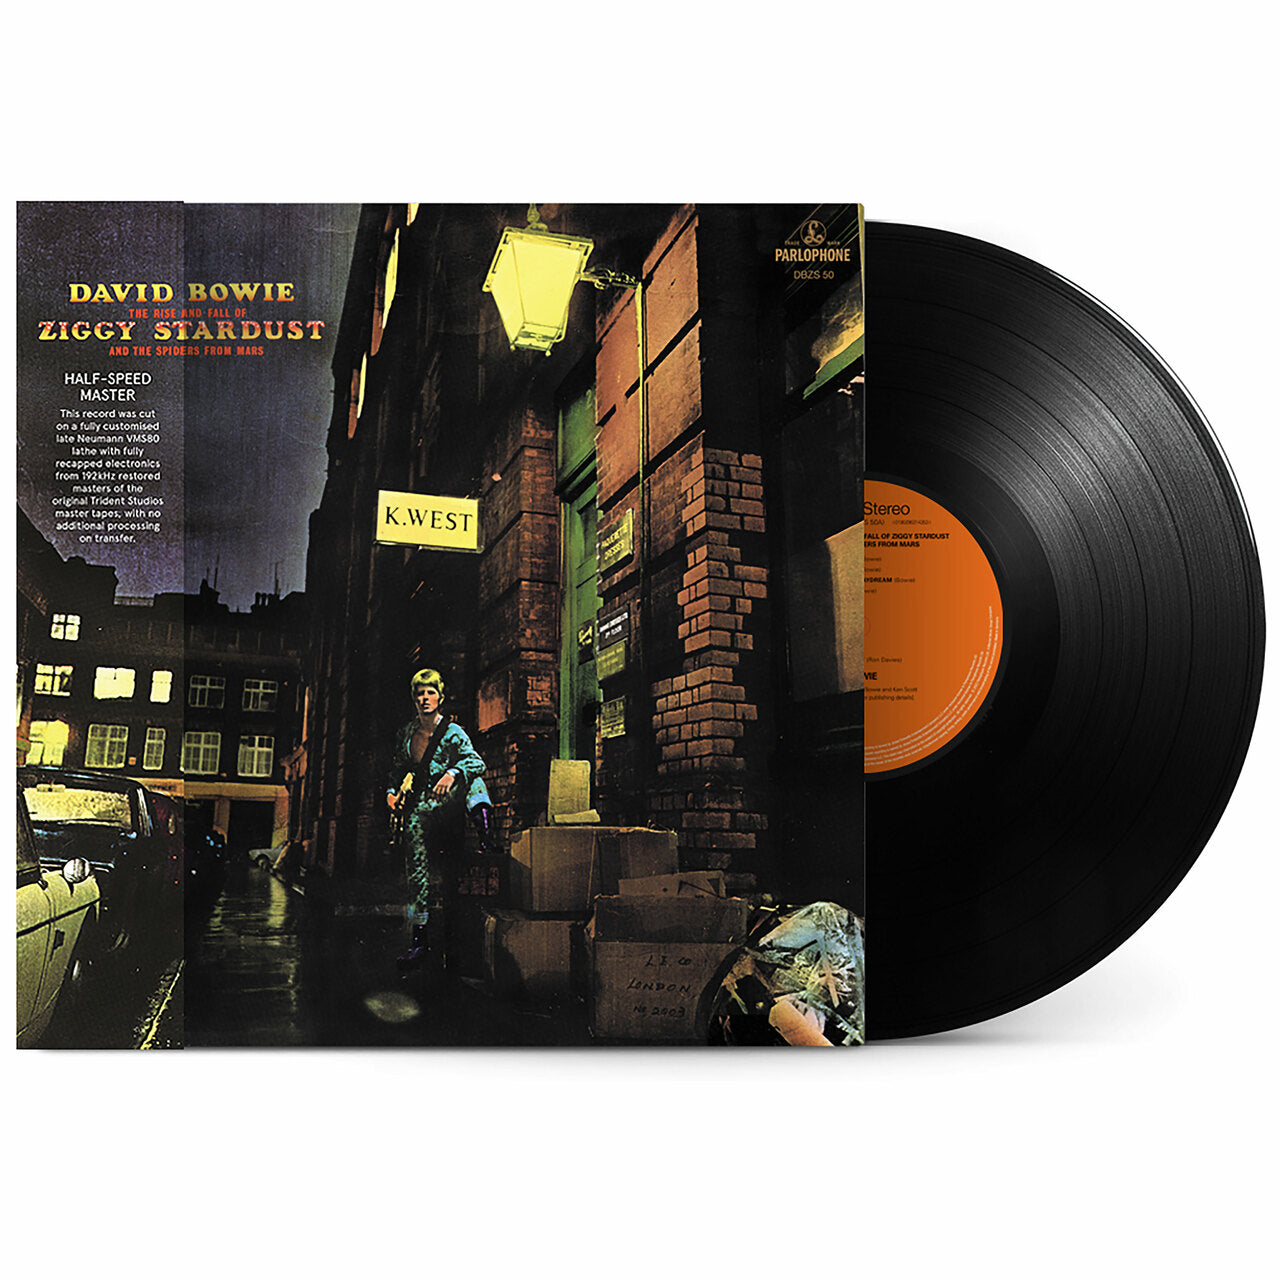 Buy David Bowie - The Rise and Fall of Ziggy Stardust and the Spiders from Mars (Remastered, Half-Speed Mastering)